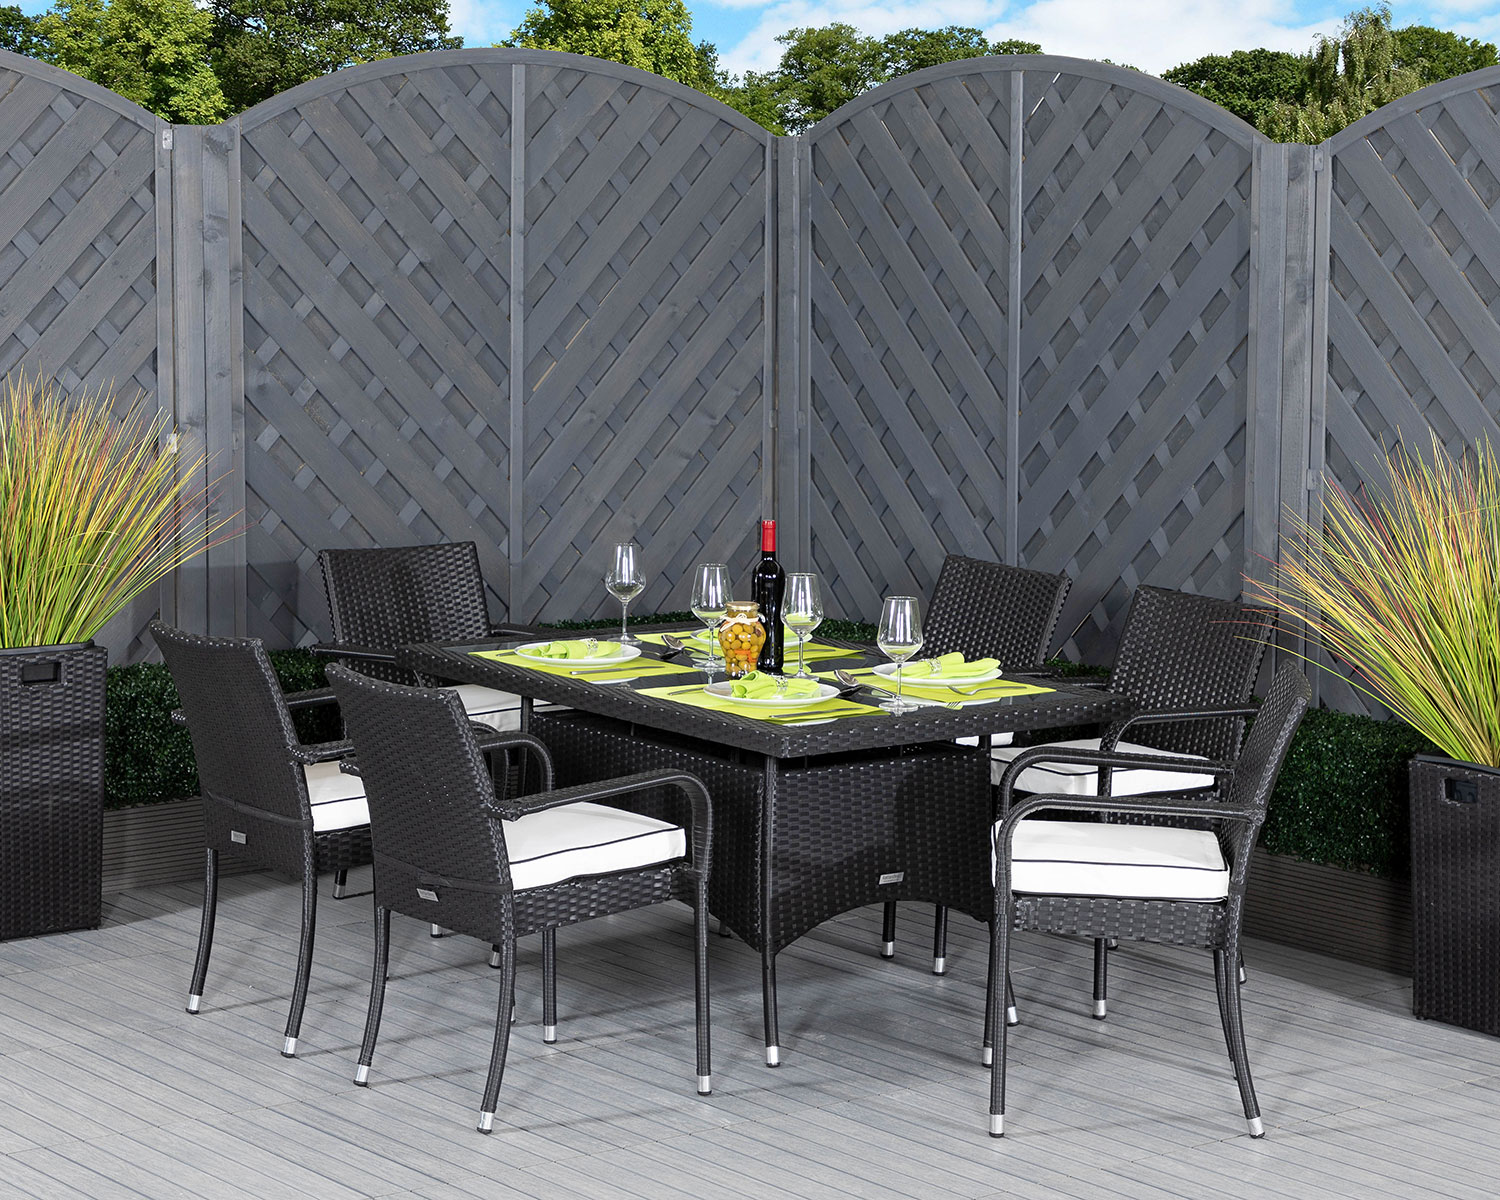 6 Seat Rattan Garden Dining Set With Small Rectangular Dining Table In Black Amp White Roma Rattan Direct